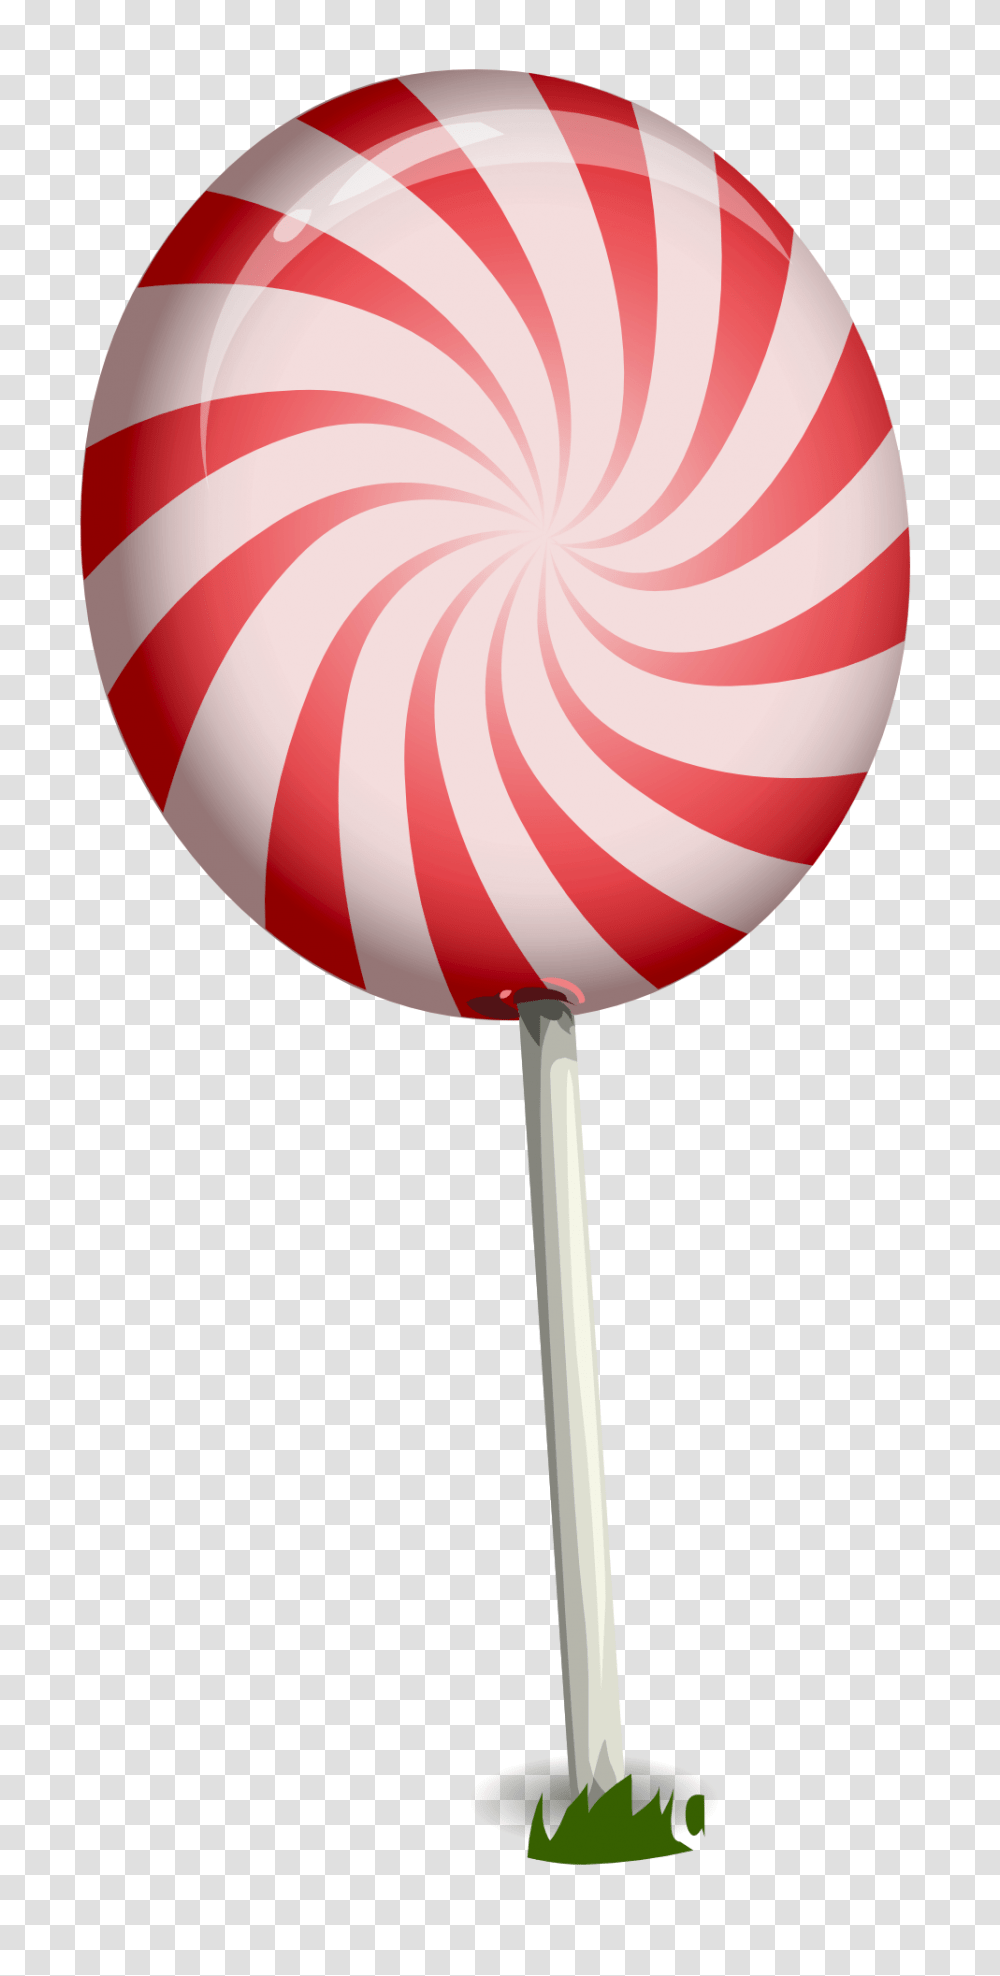 Candy Lollipop Image, Food, Lamp, Balloon Transparent Png